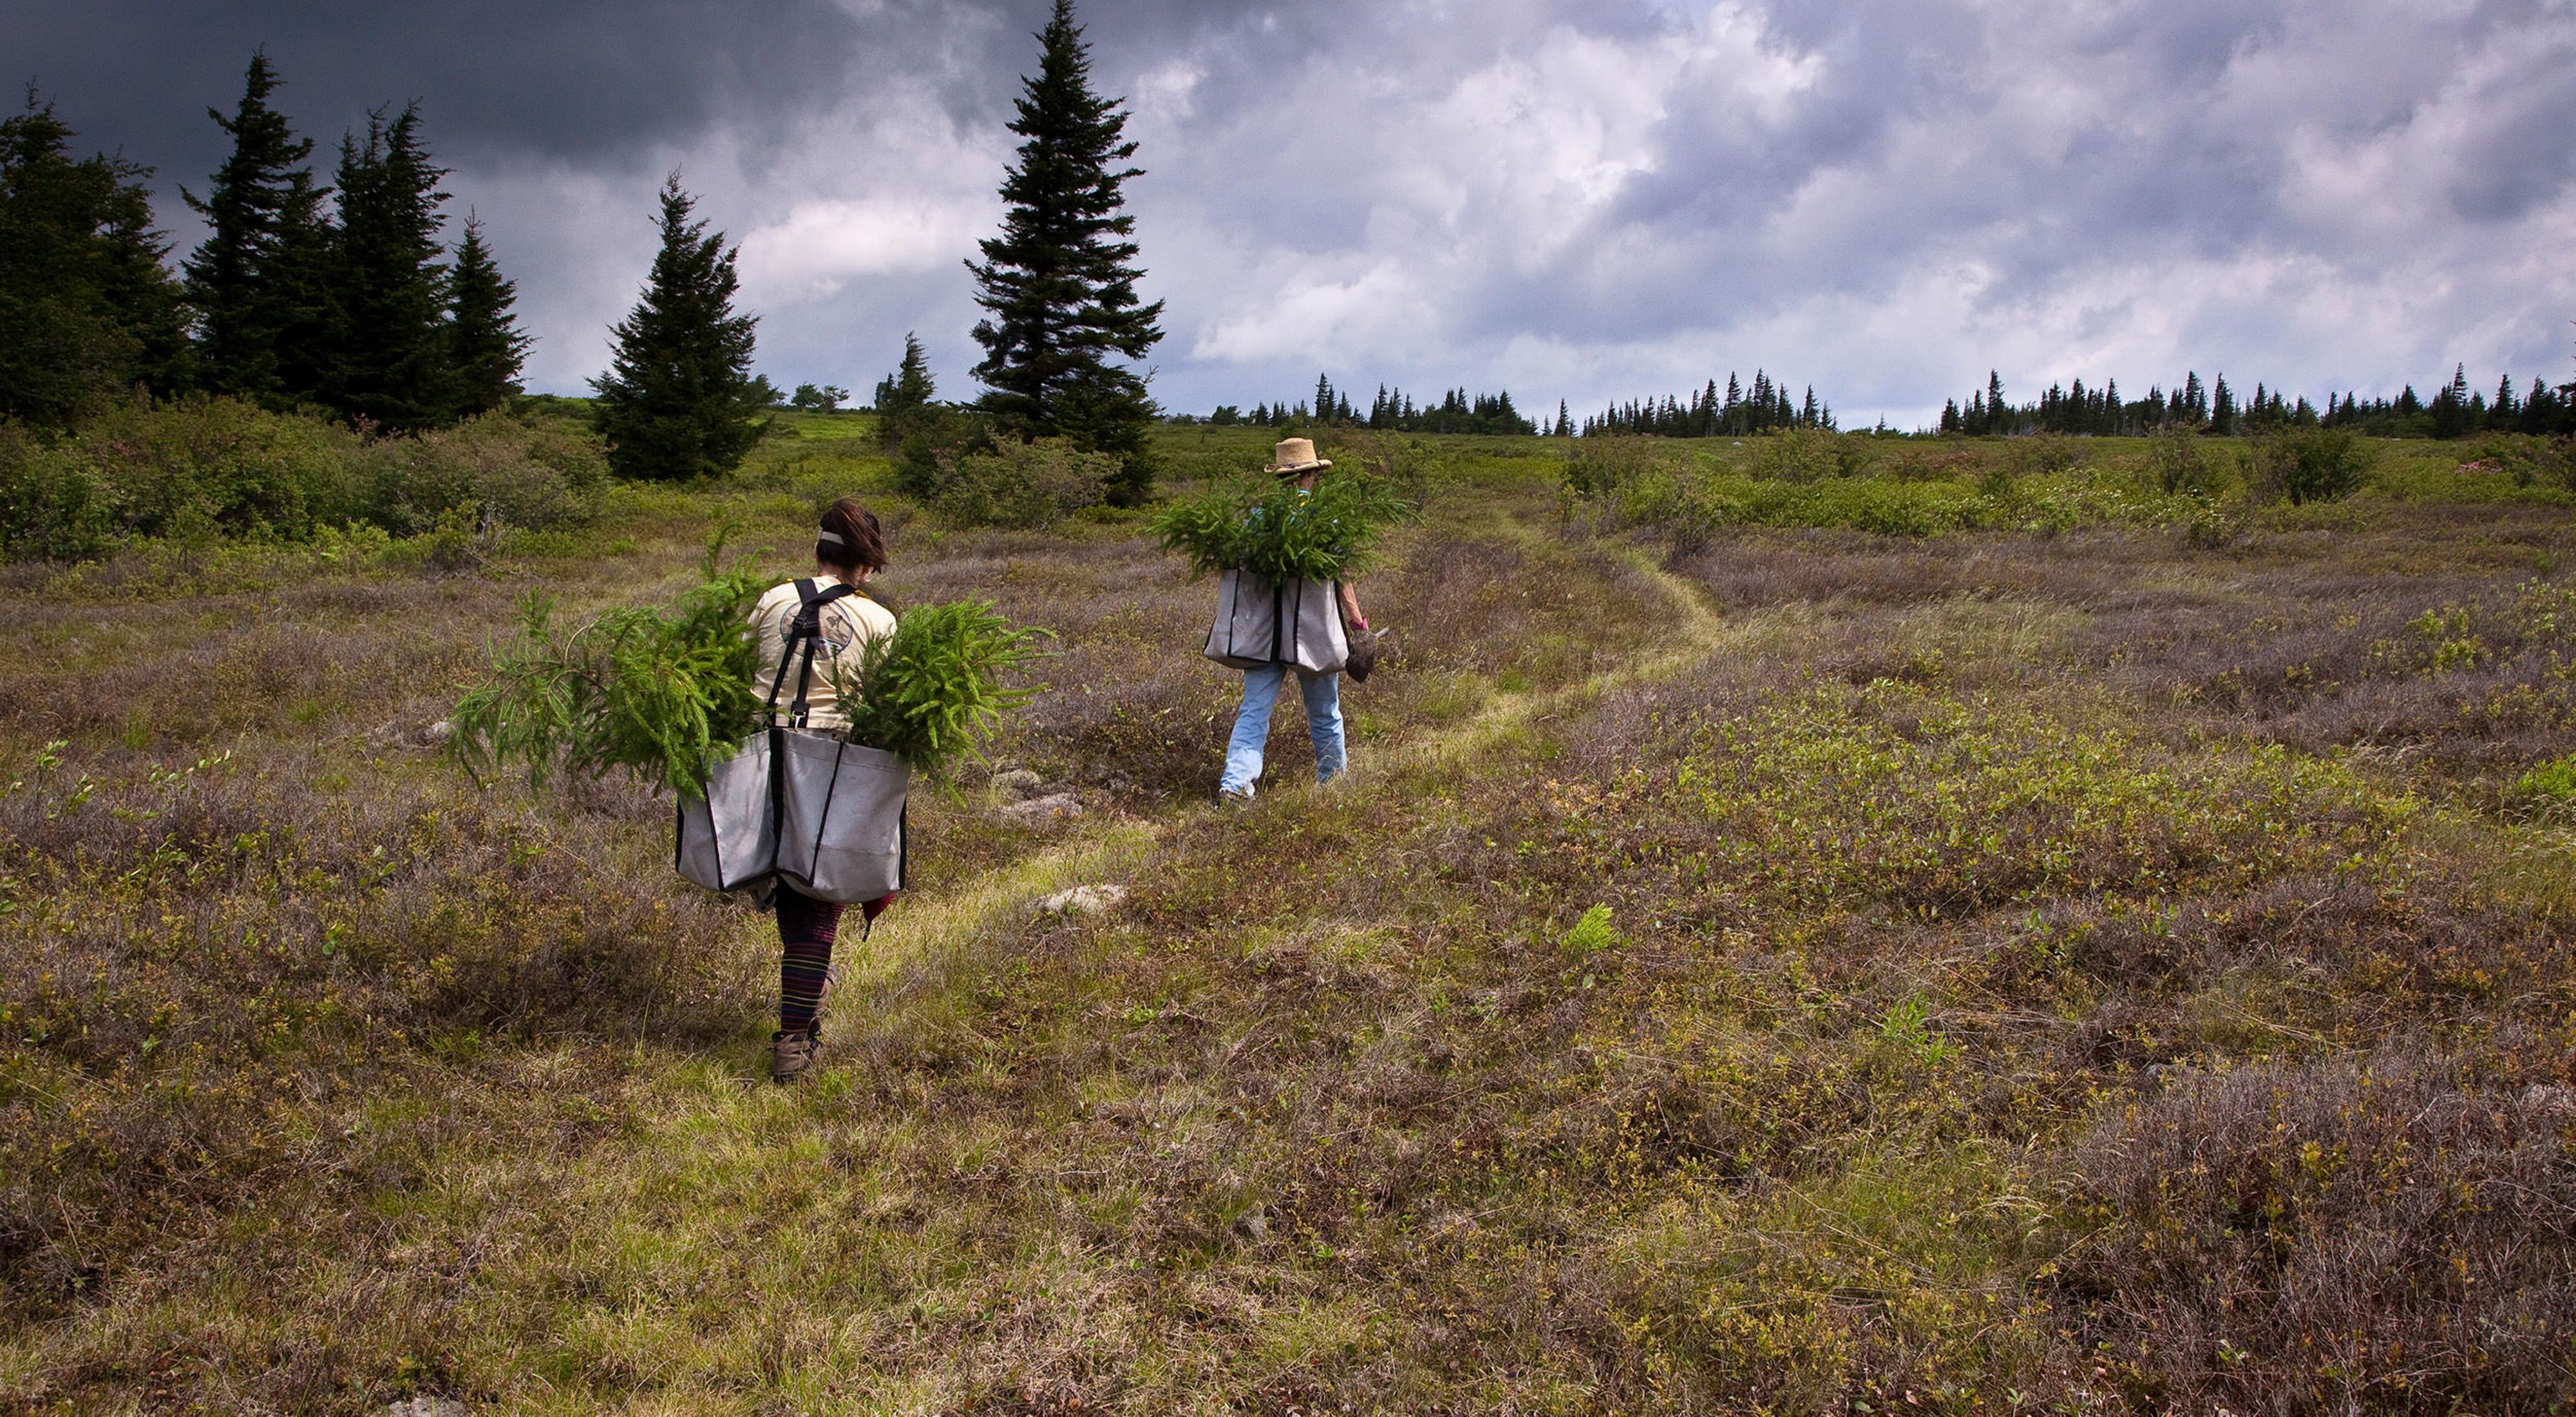 Two people walking away from camera in a brushy bog.